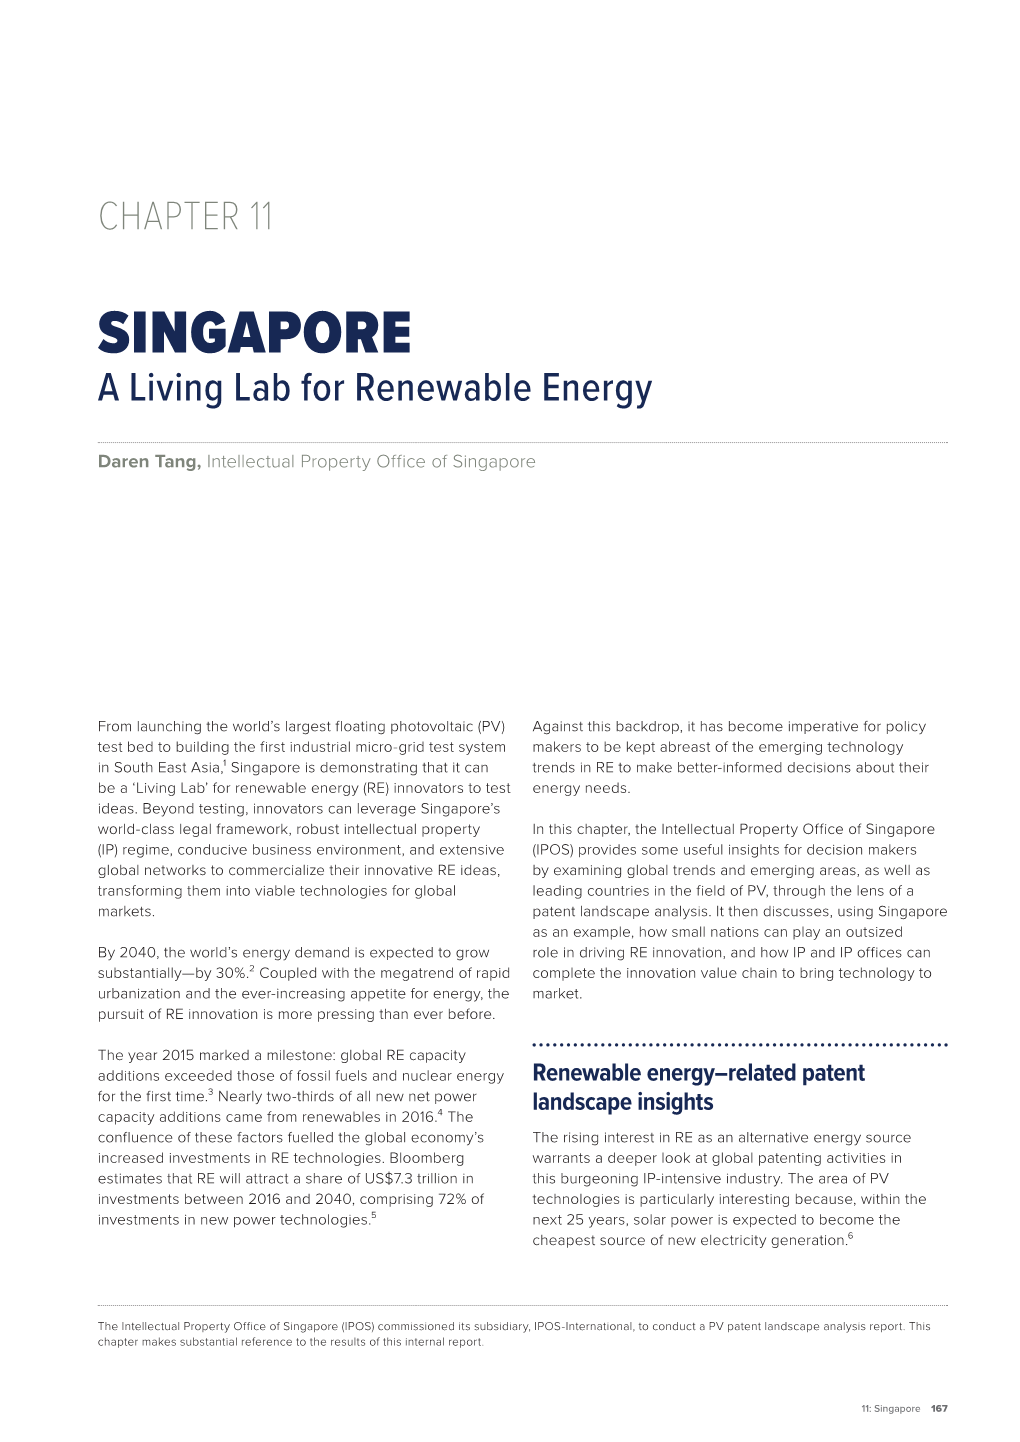 SINGAPORE a Living Lab for Renewable Energy